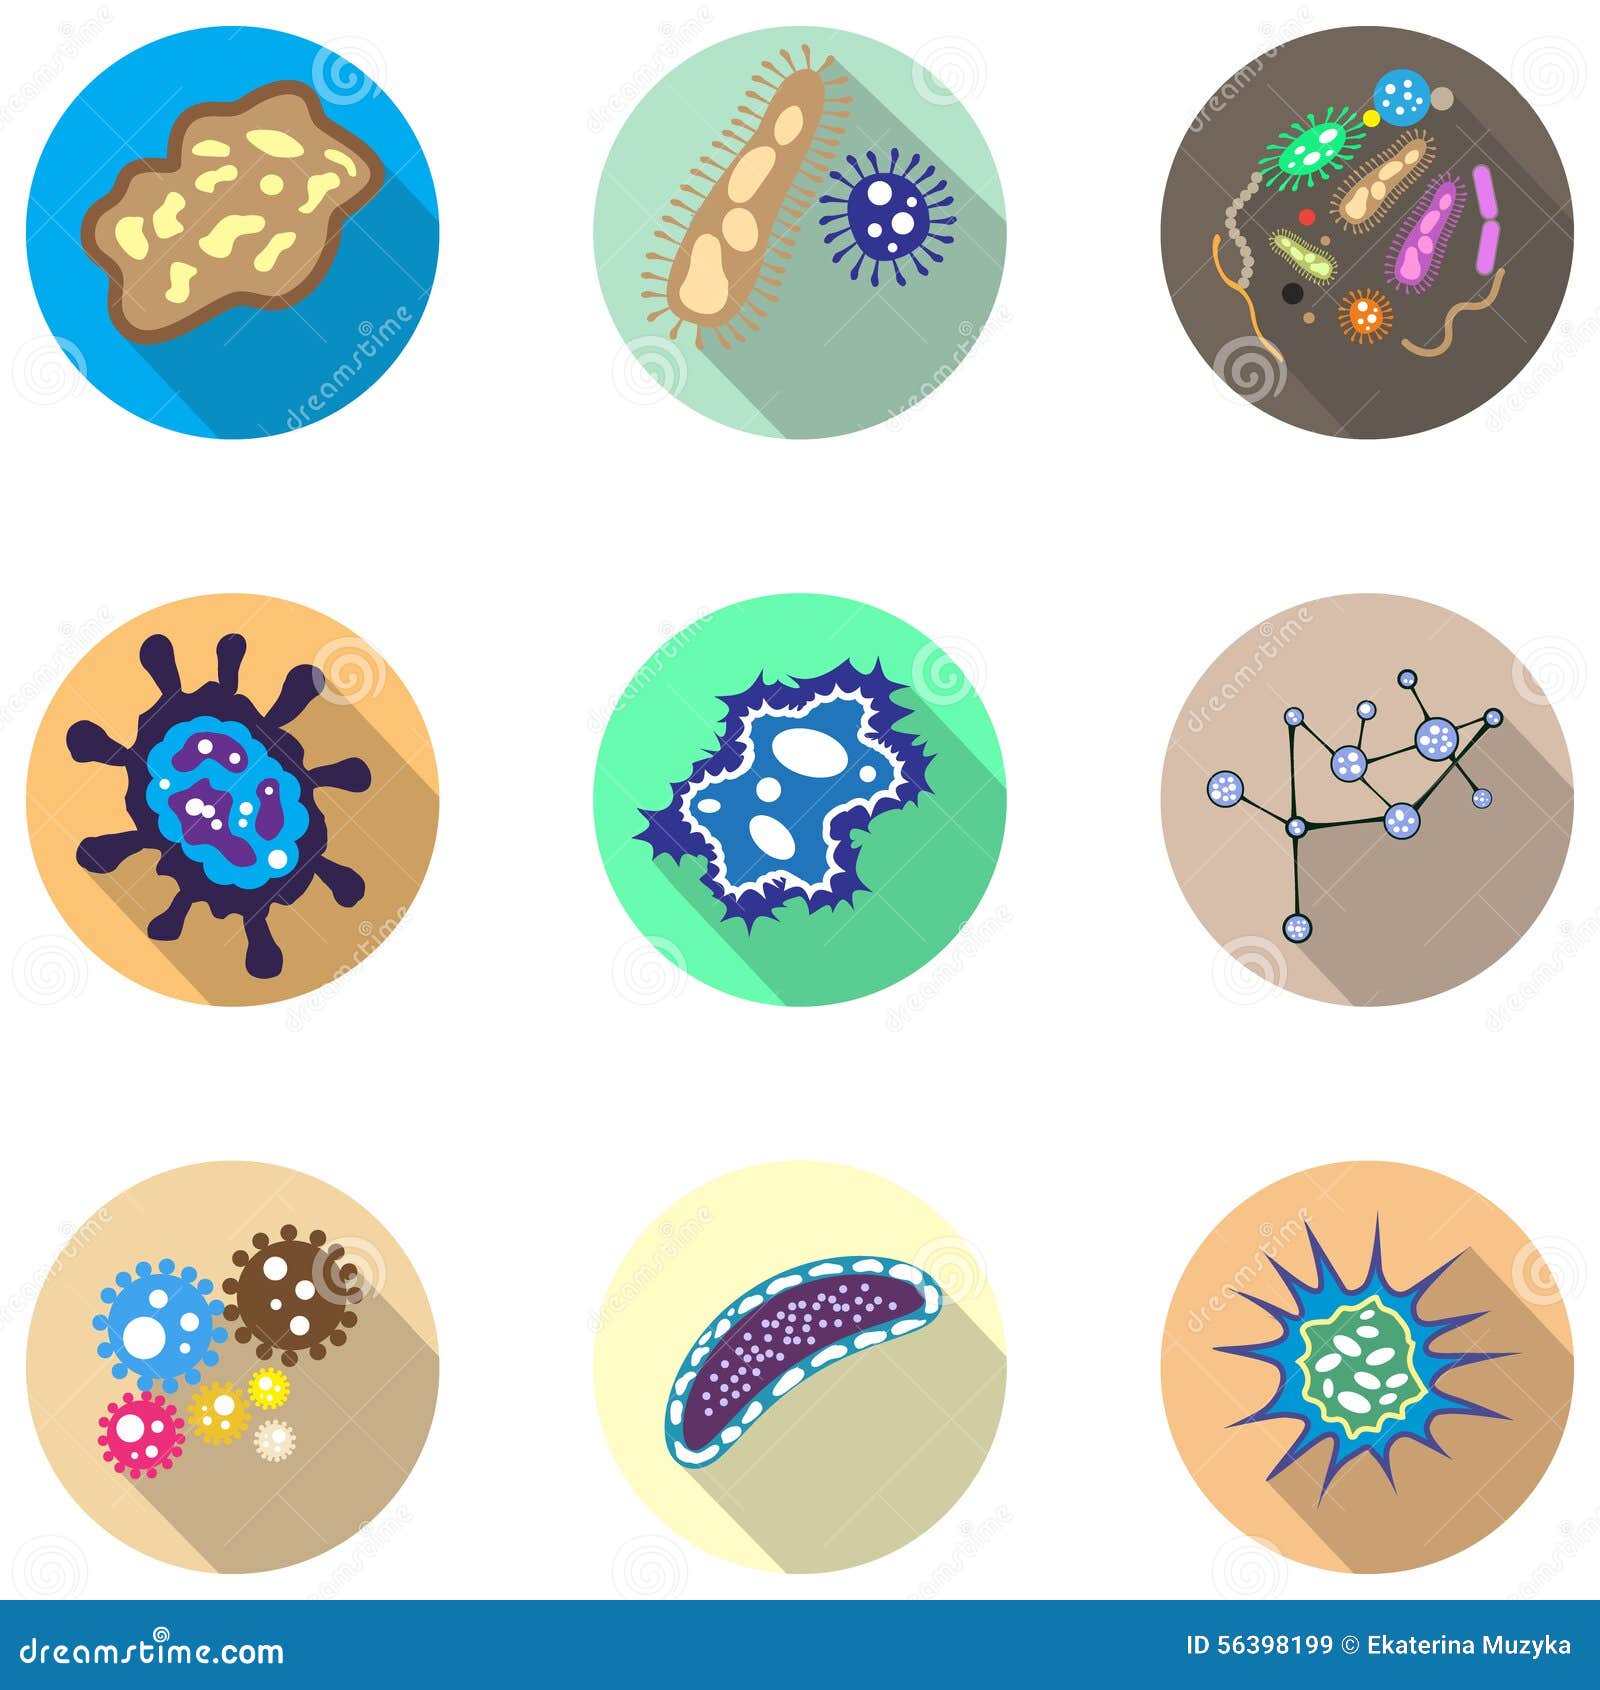 bacteria, microorganism and virus cells icons set